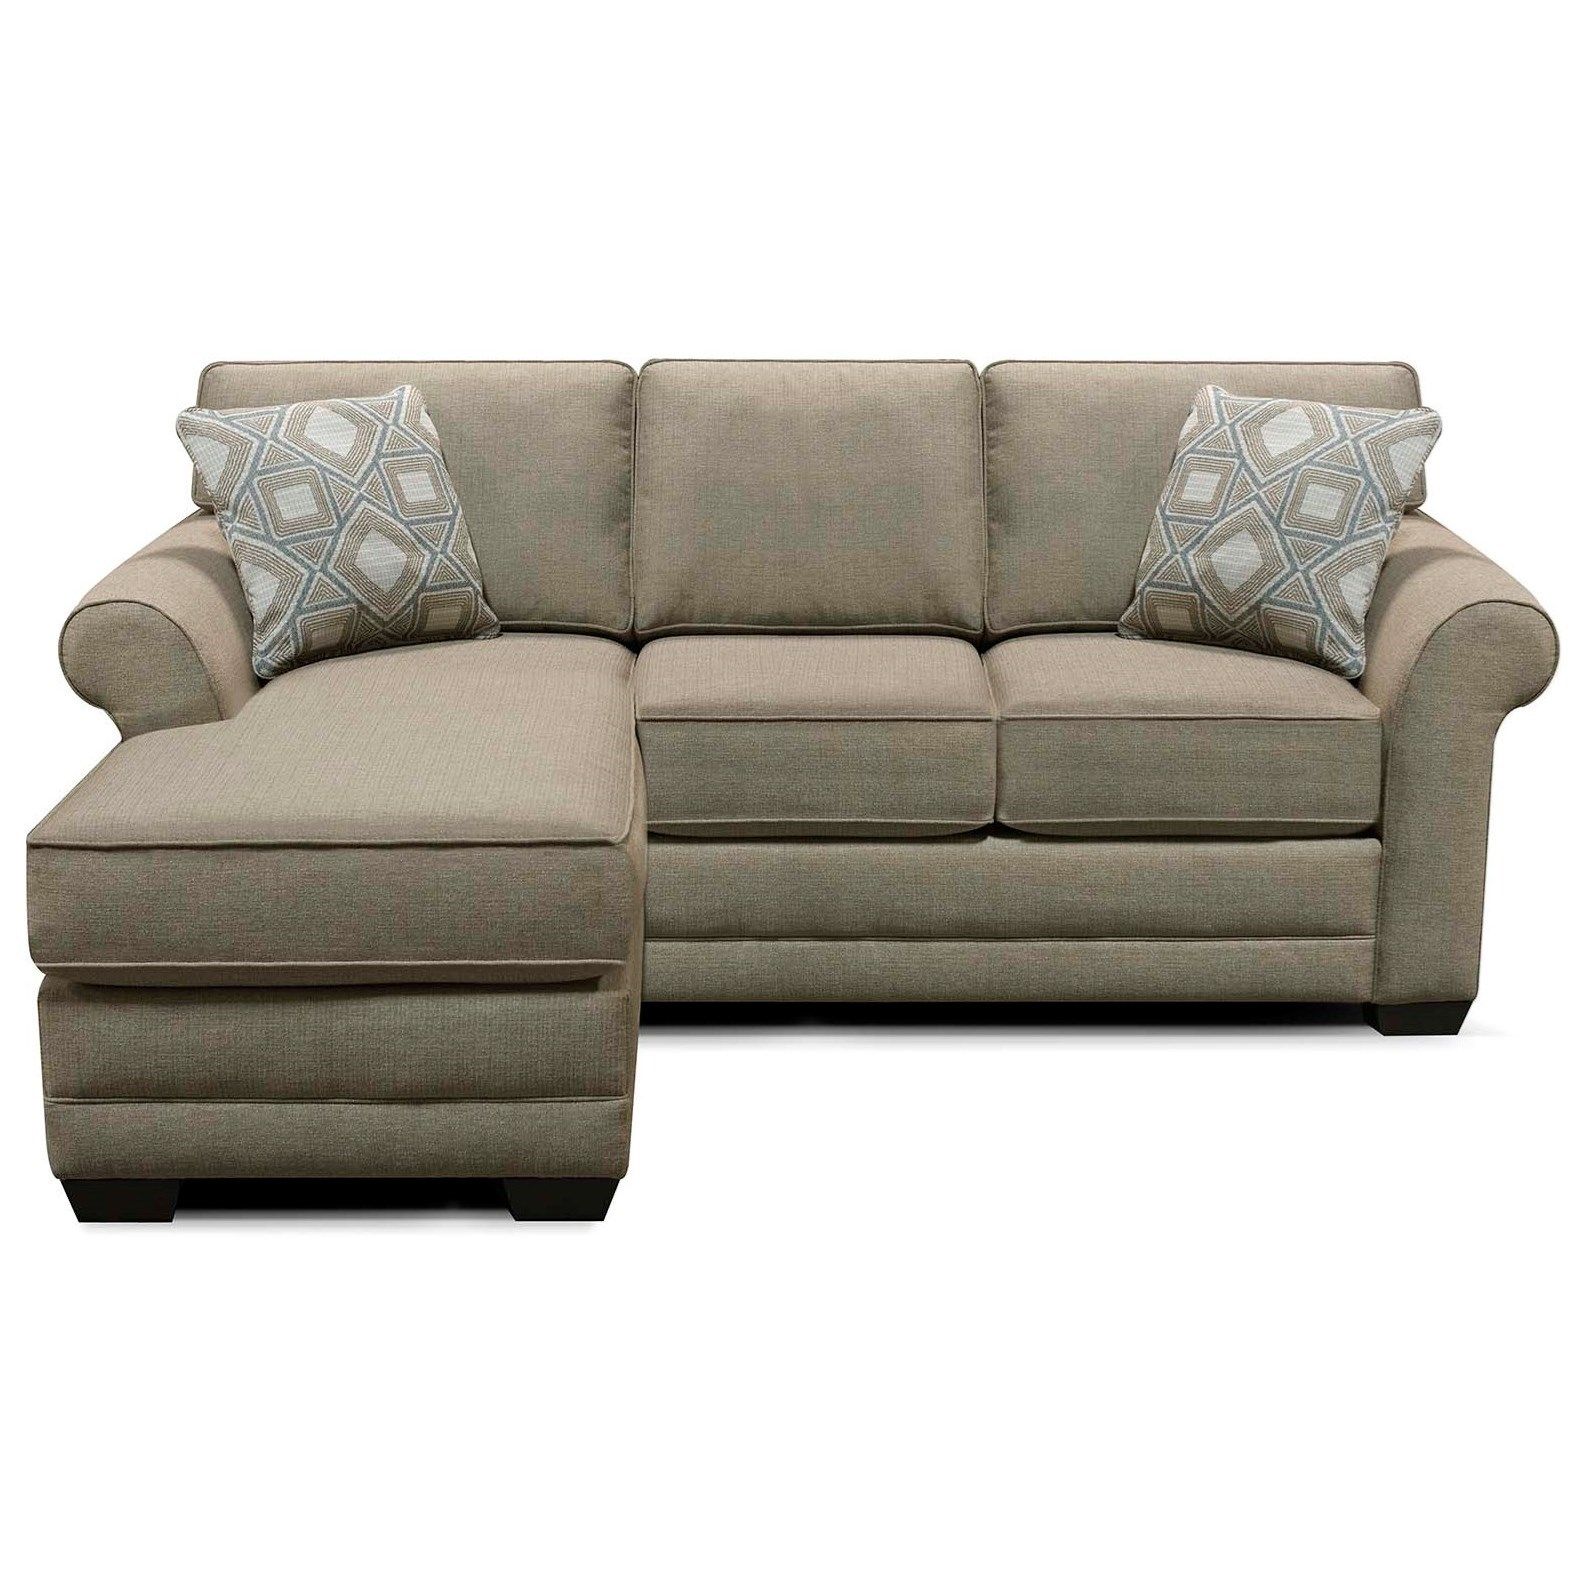 England Wallace Transitional Sofa With Floating Ottoman Chaise | Superstore  | Sectional – Sofa Groups Inside Floating Ottomans (Gallery 13 of 20)